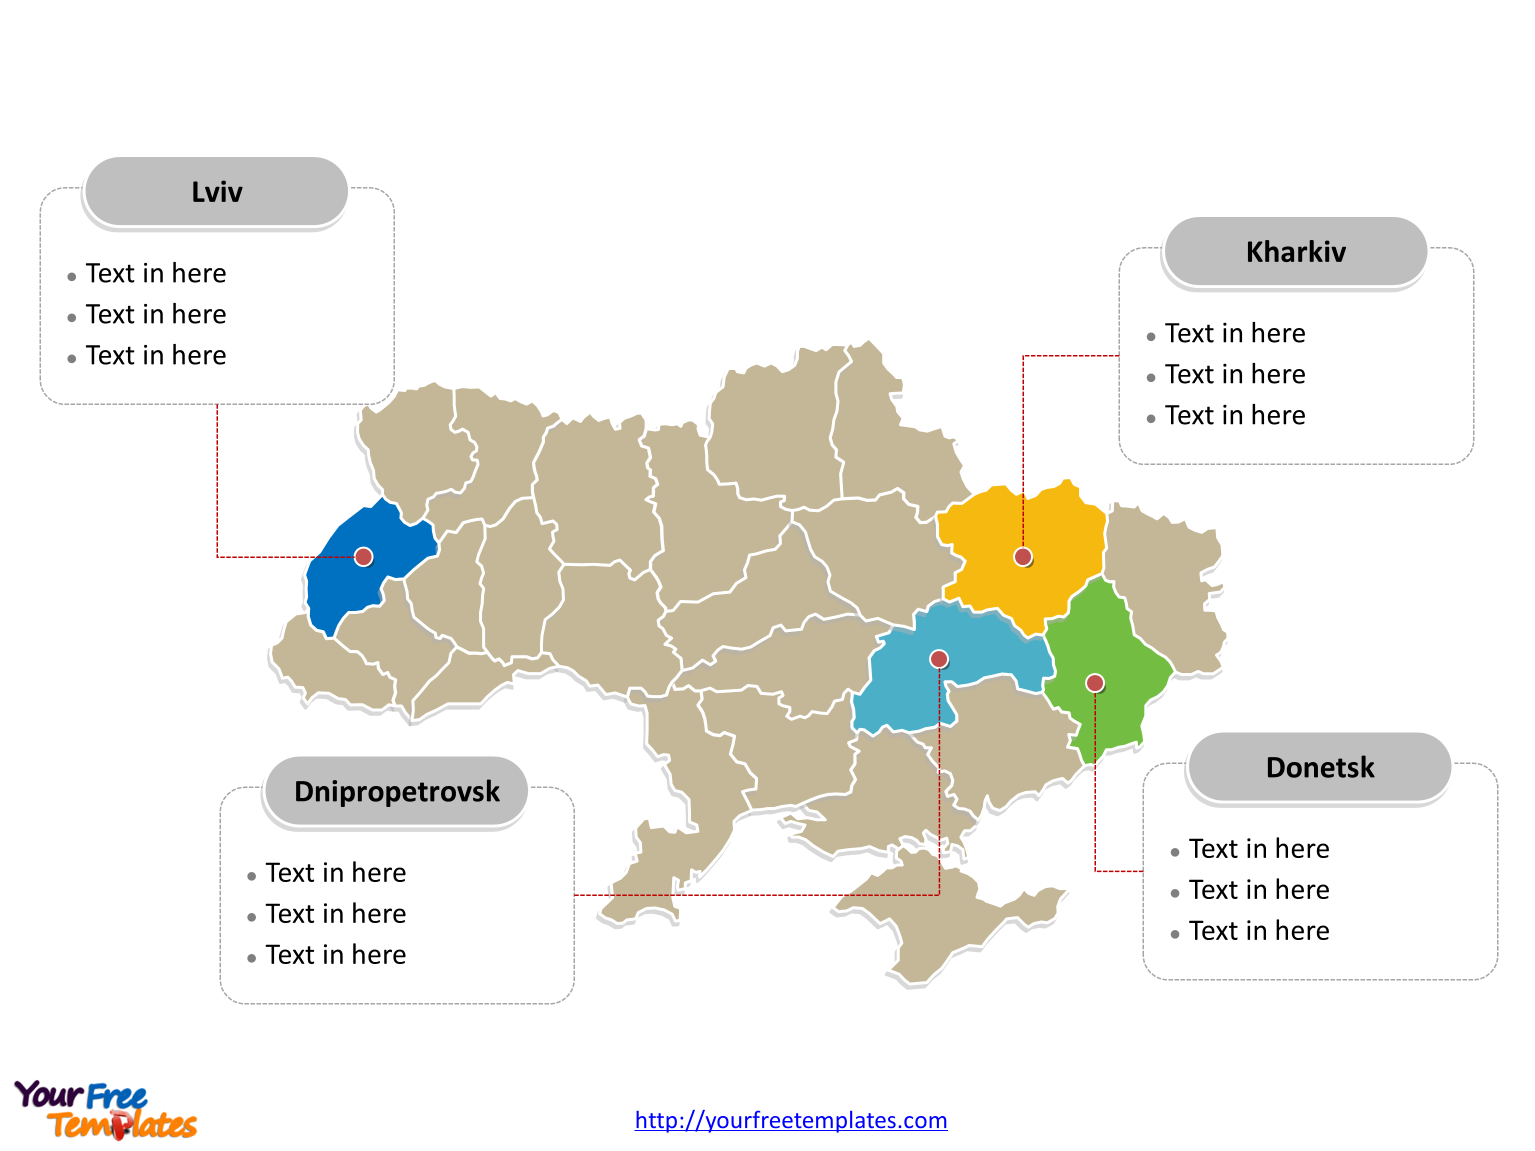 Ukraine Political map labeled with major regions